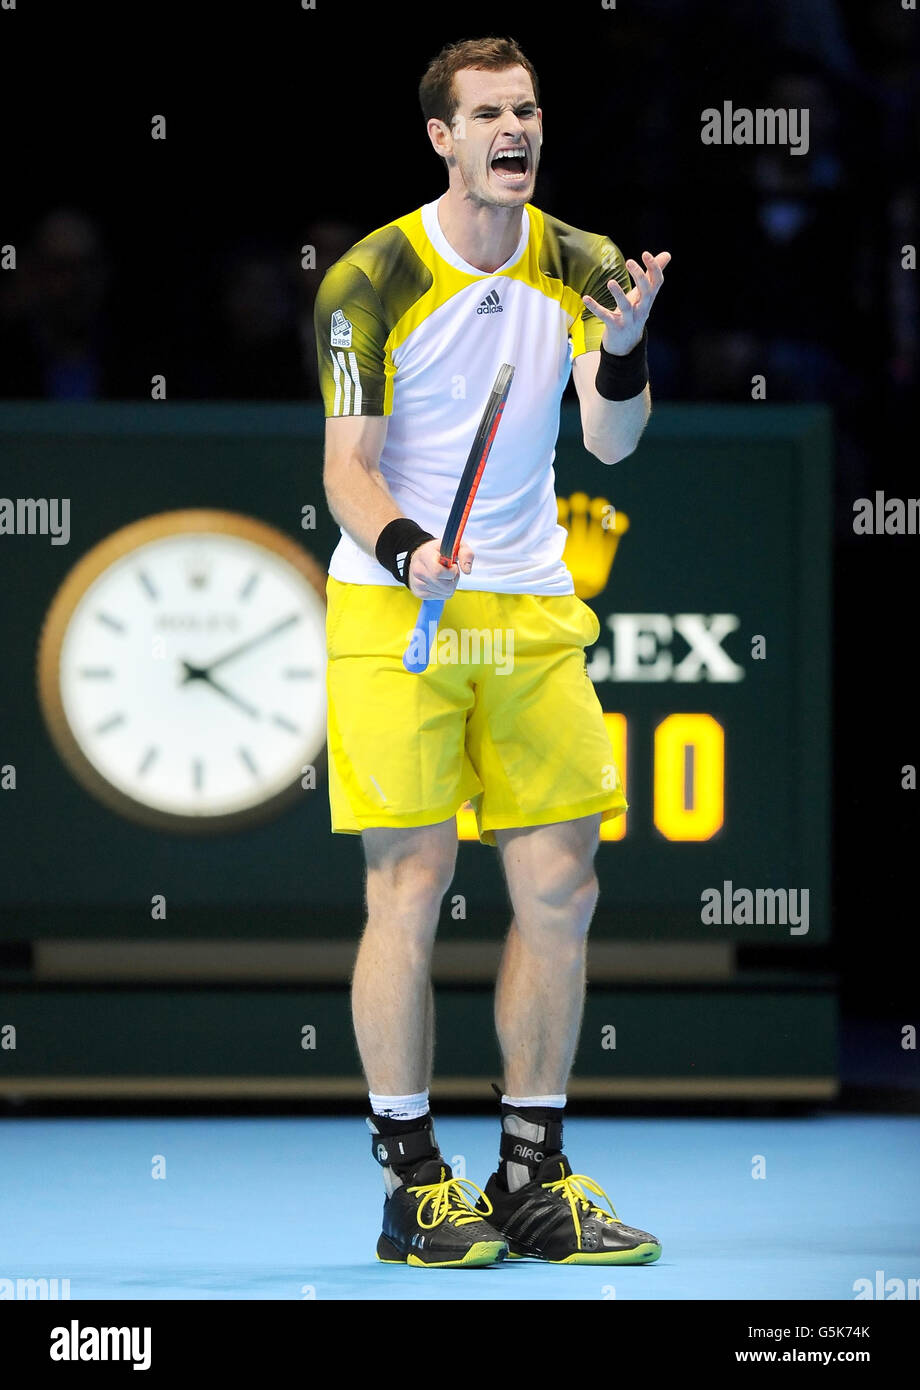 Great Britain's Andy Murray shows his frustration on his way to defeat by Serbia's Novak Djokovic during the Barclays ATP World Tour Finals at the O2 Arena, London. Stock Photo